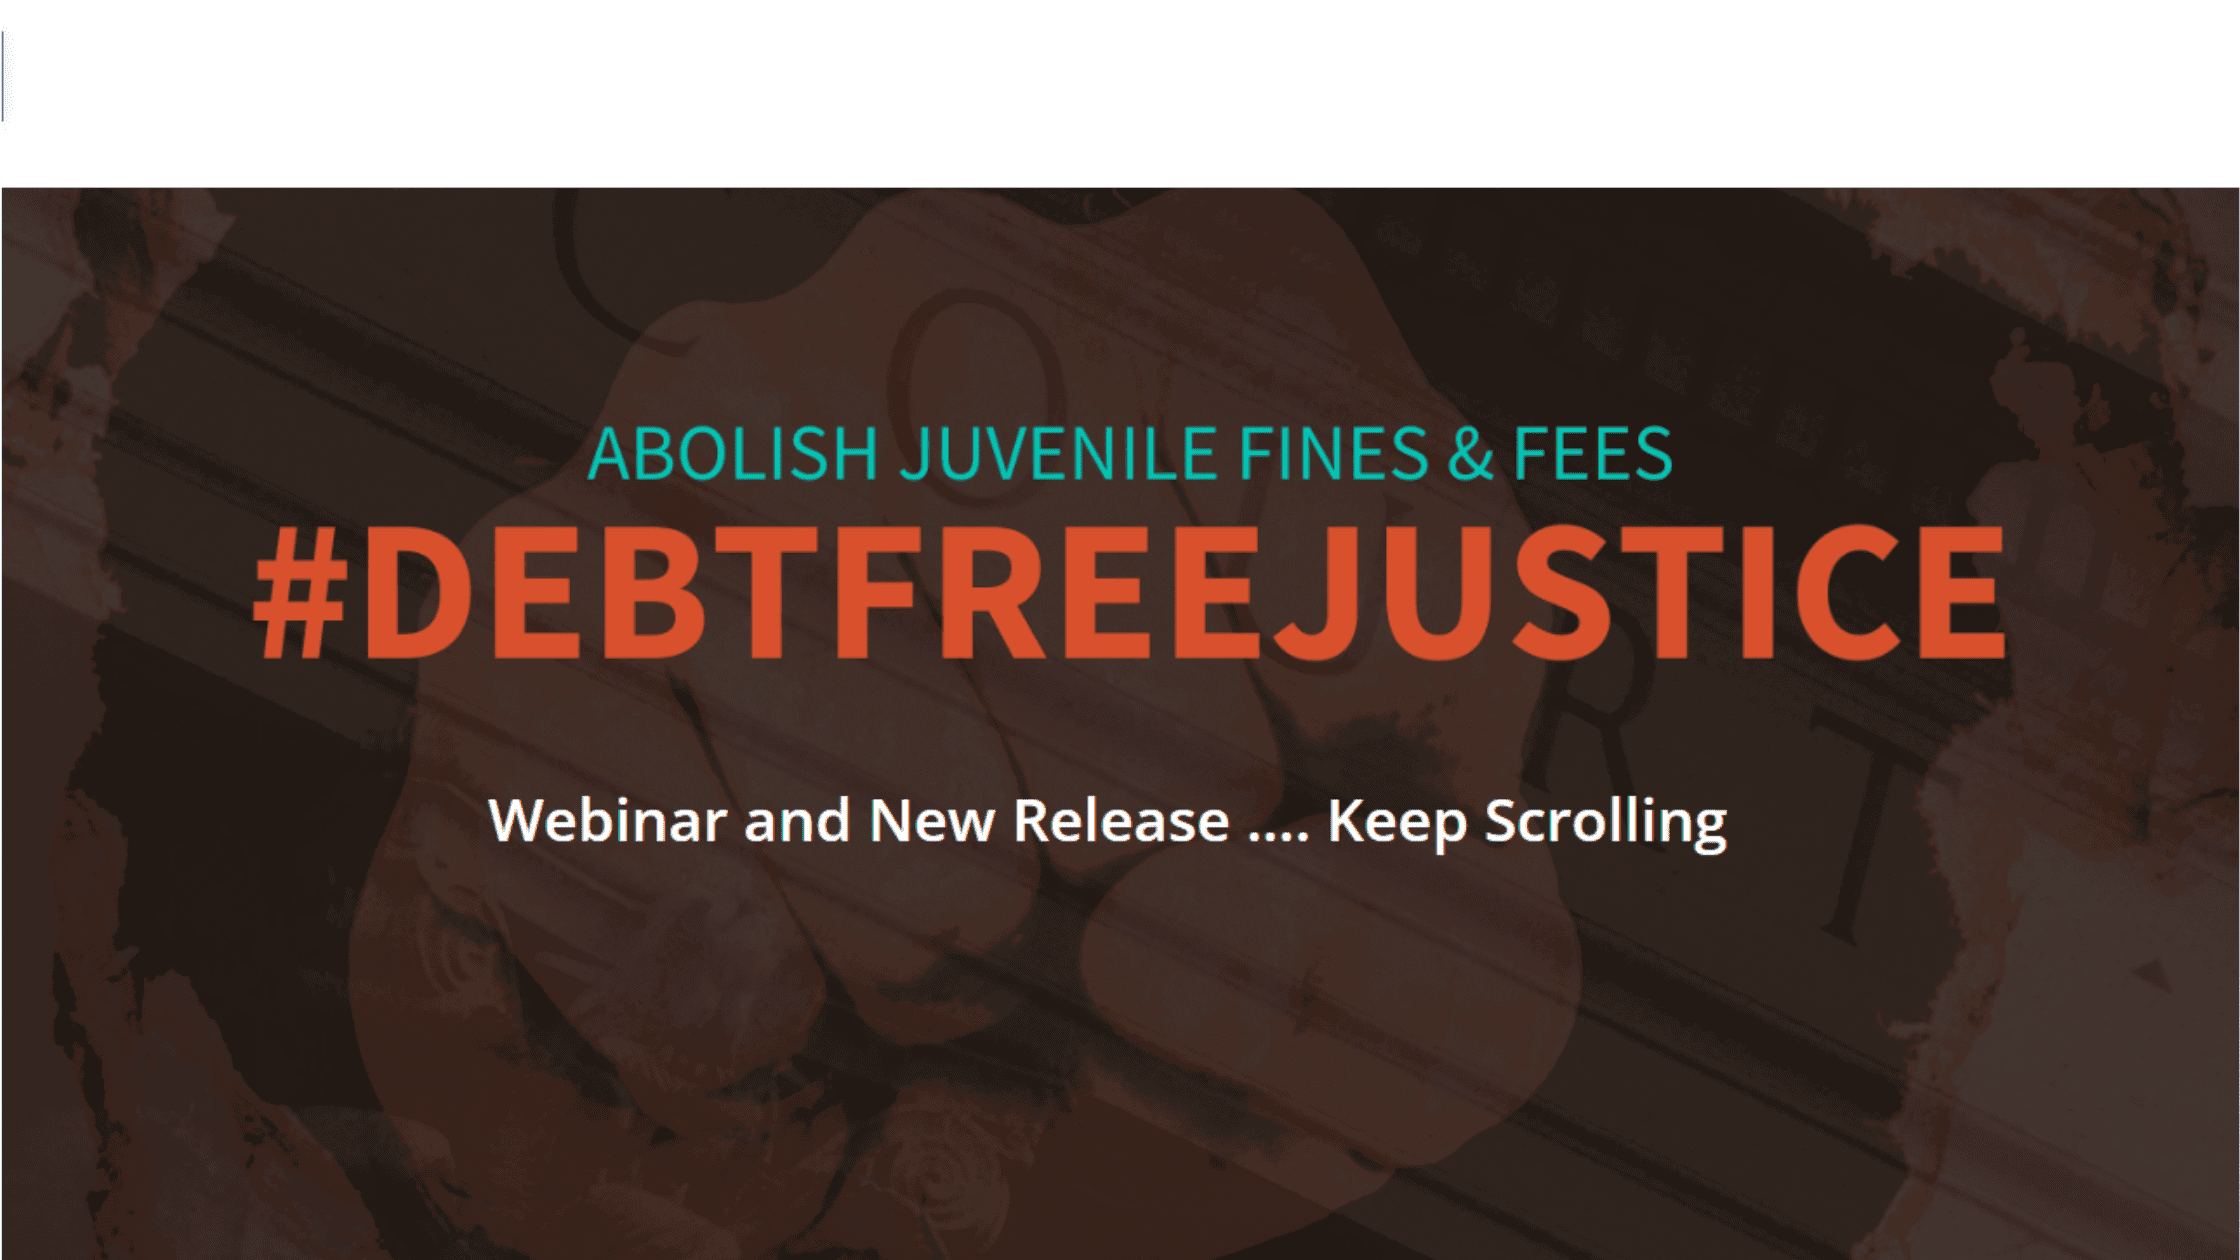 Red text reads: #DebtFreeJustice. Teal text in smaller letters reads: Abolish Juvenile Fines & Fees.